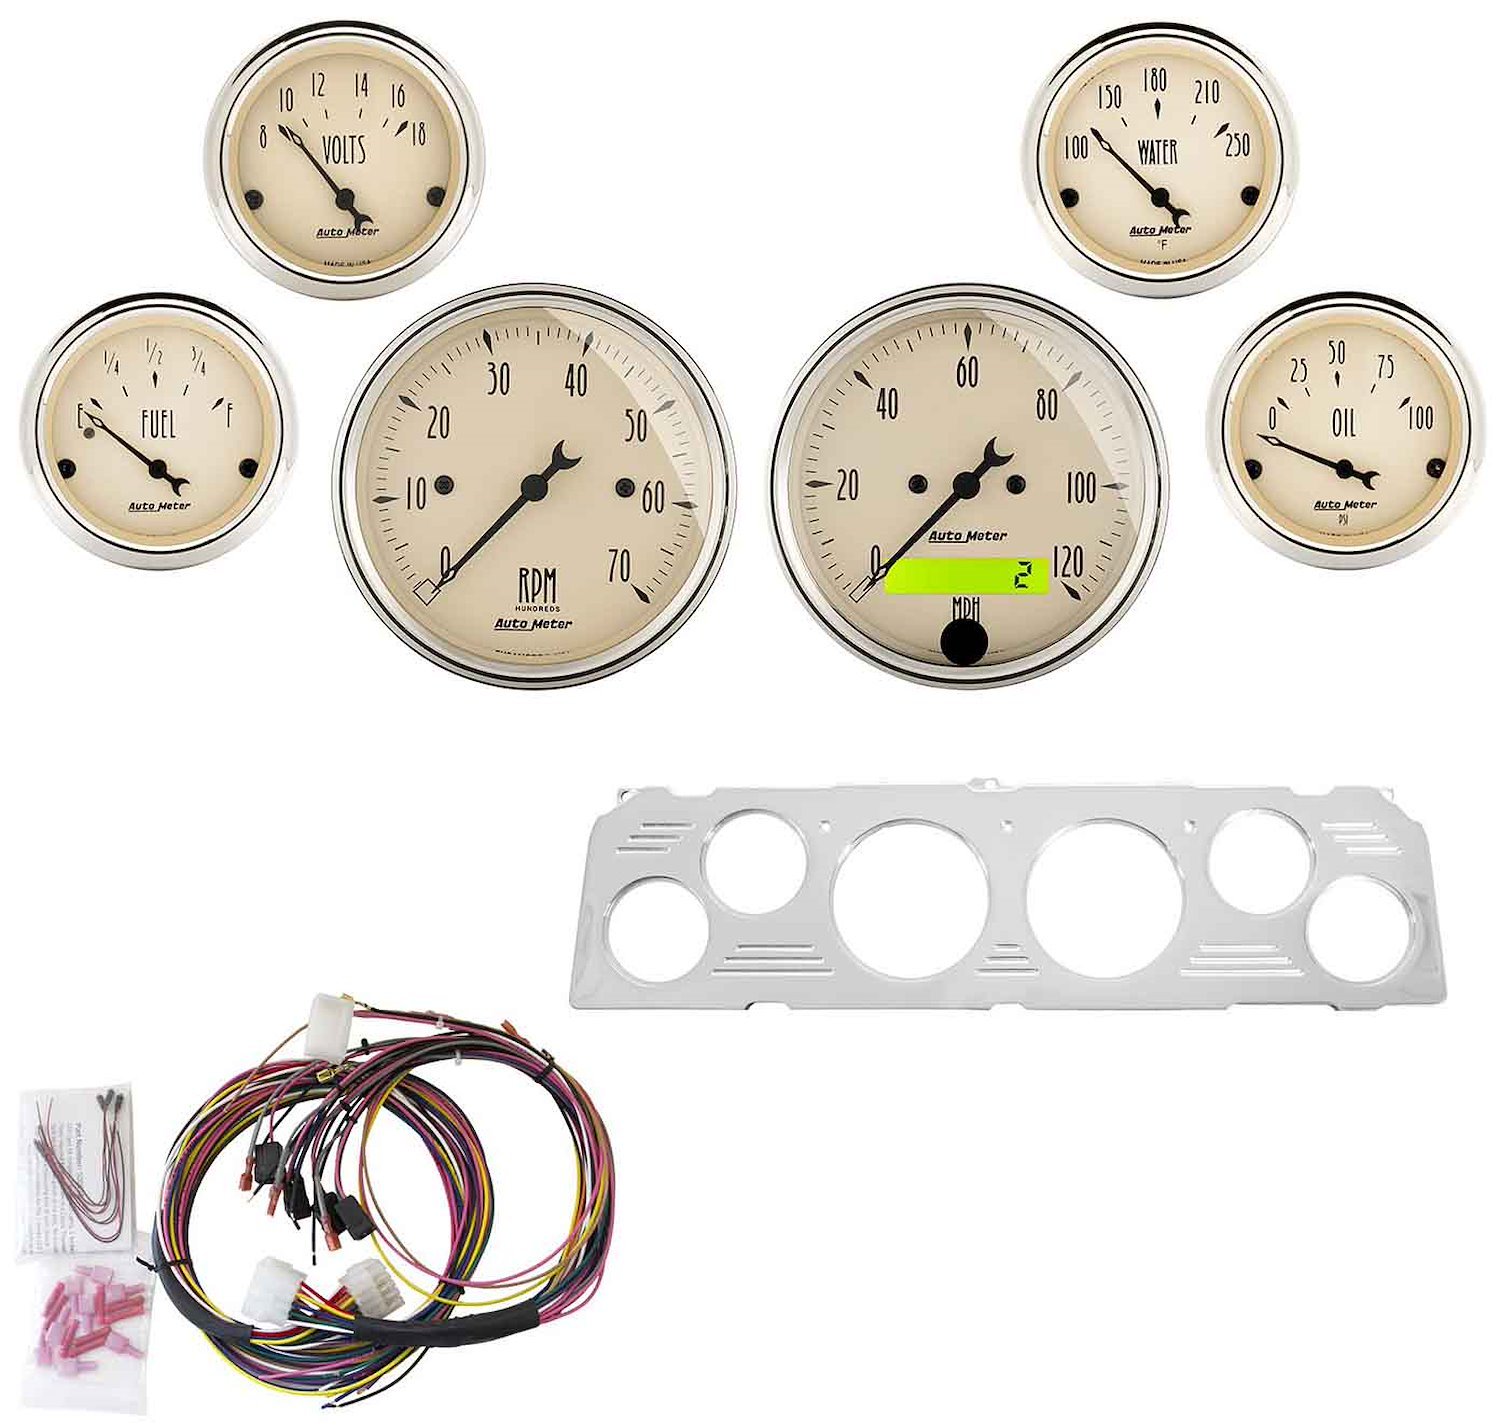 6-Gauge Direct-Fit Dash Kit 1964-1966 Chevy Truck - Antique Beige Series - Polished Panel